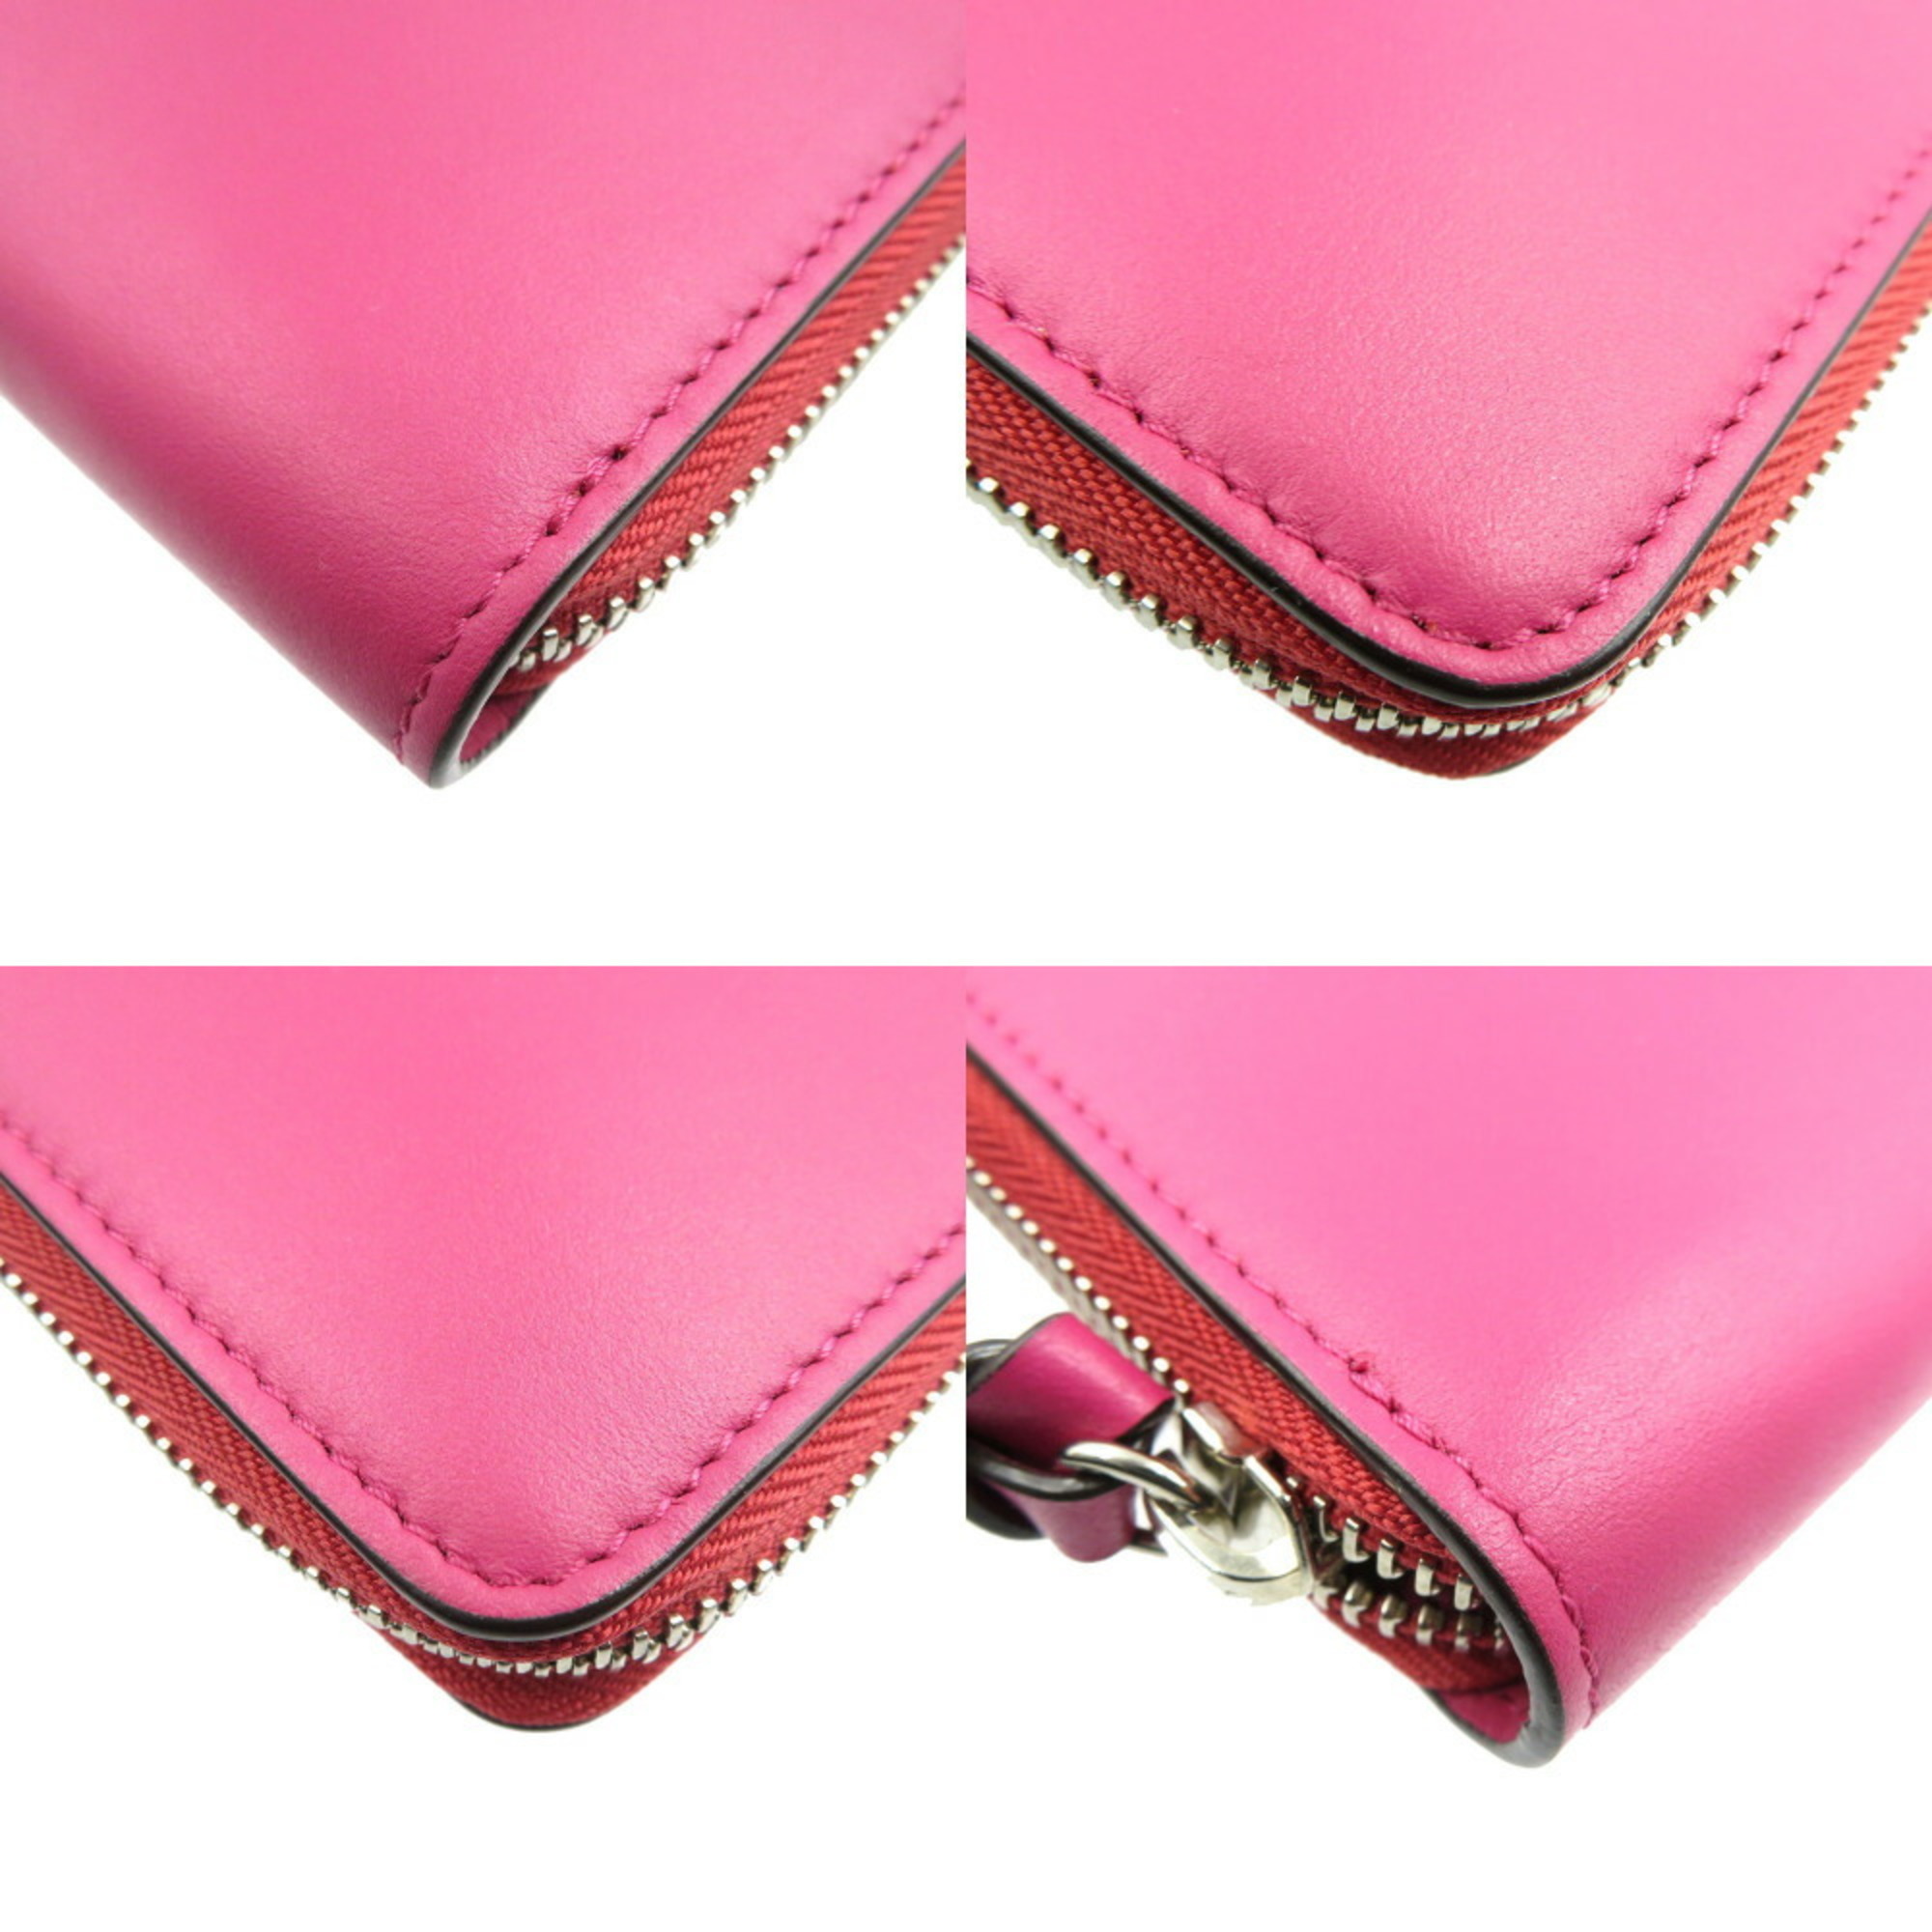 Jimmy Choo Pippa Leather Pink Round Long Wallet 0073JIMMY CHOO 6A0073IEE5